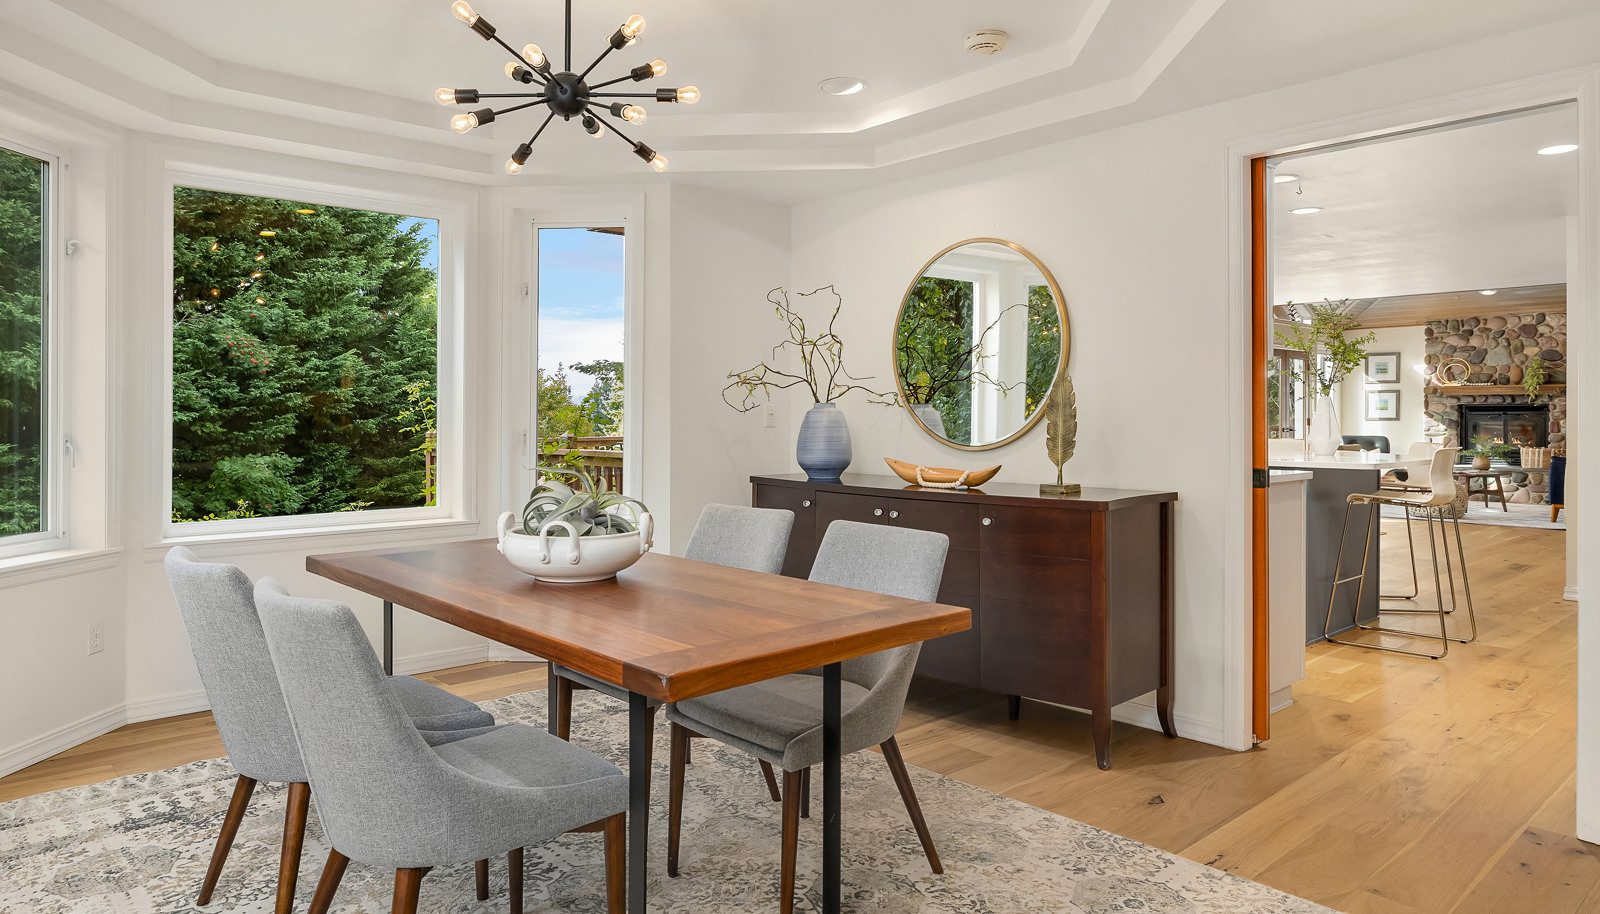 Dining room off the living room has bay windows and a tray ceiling creating an open atmosphere.